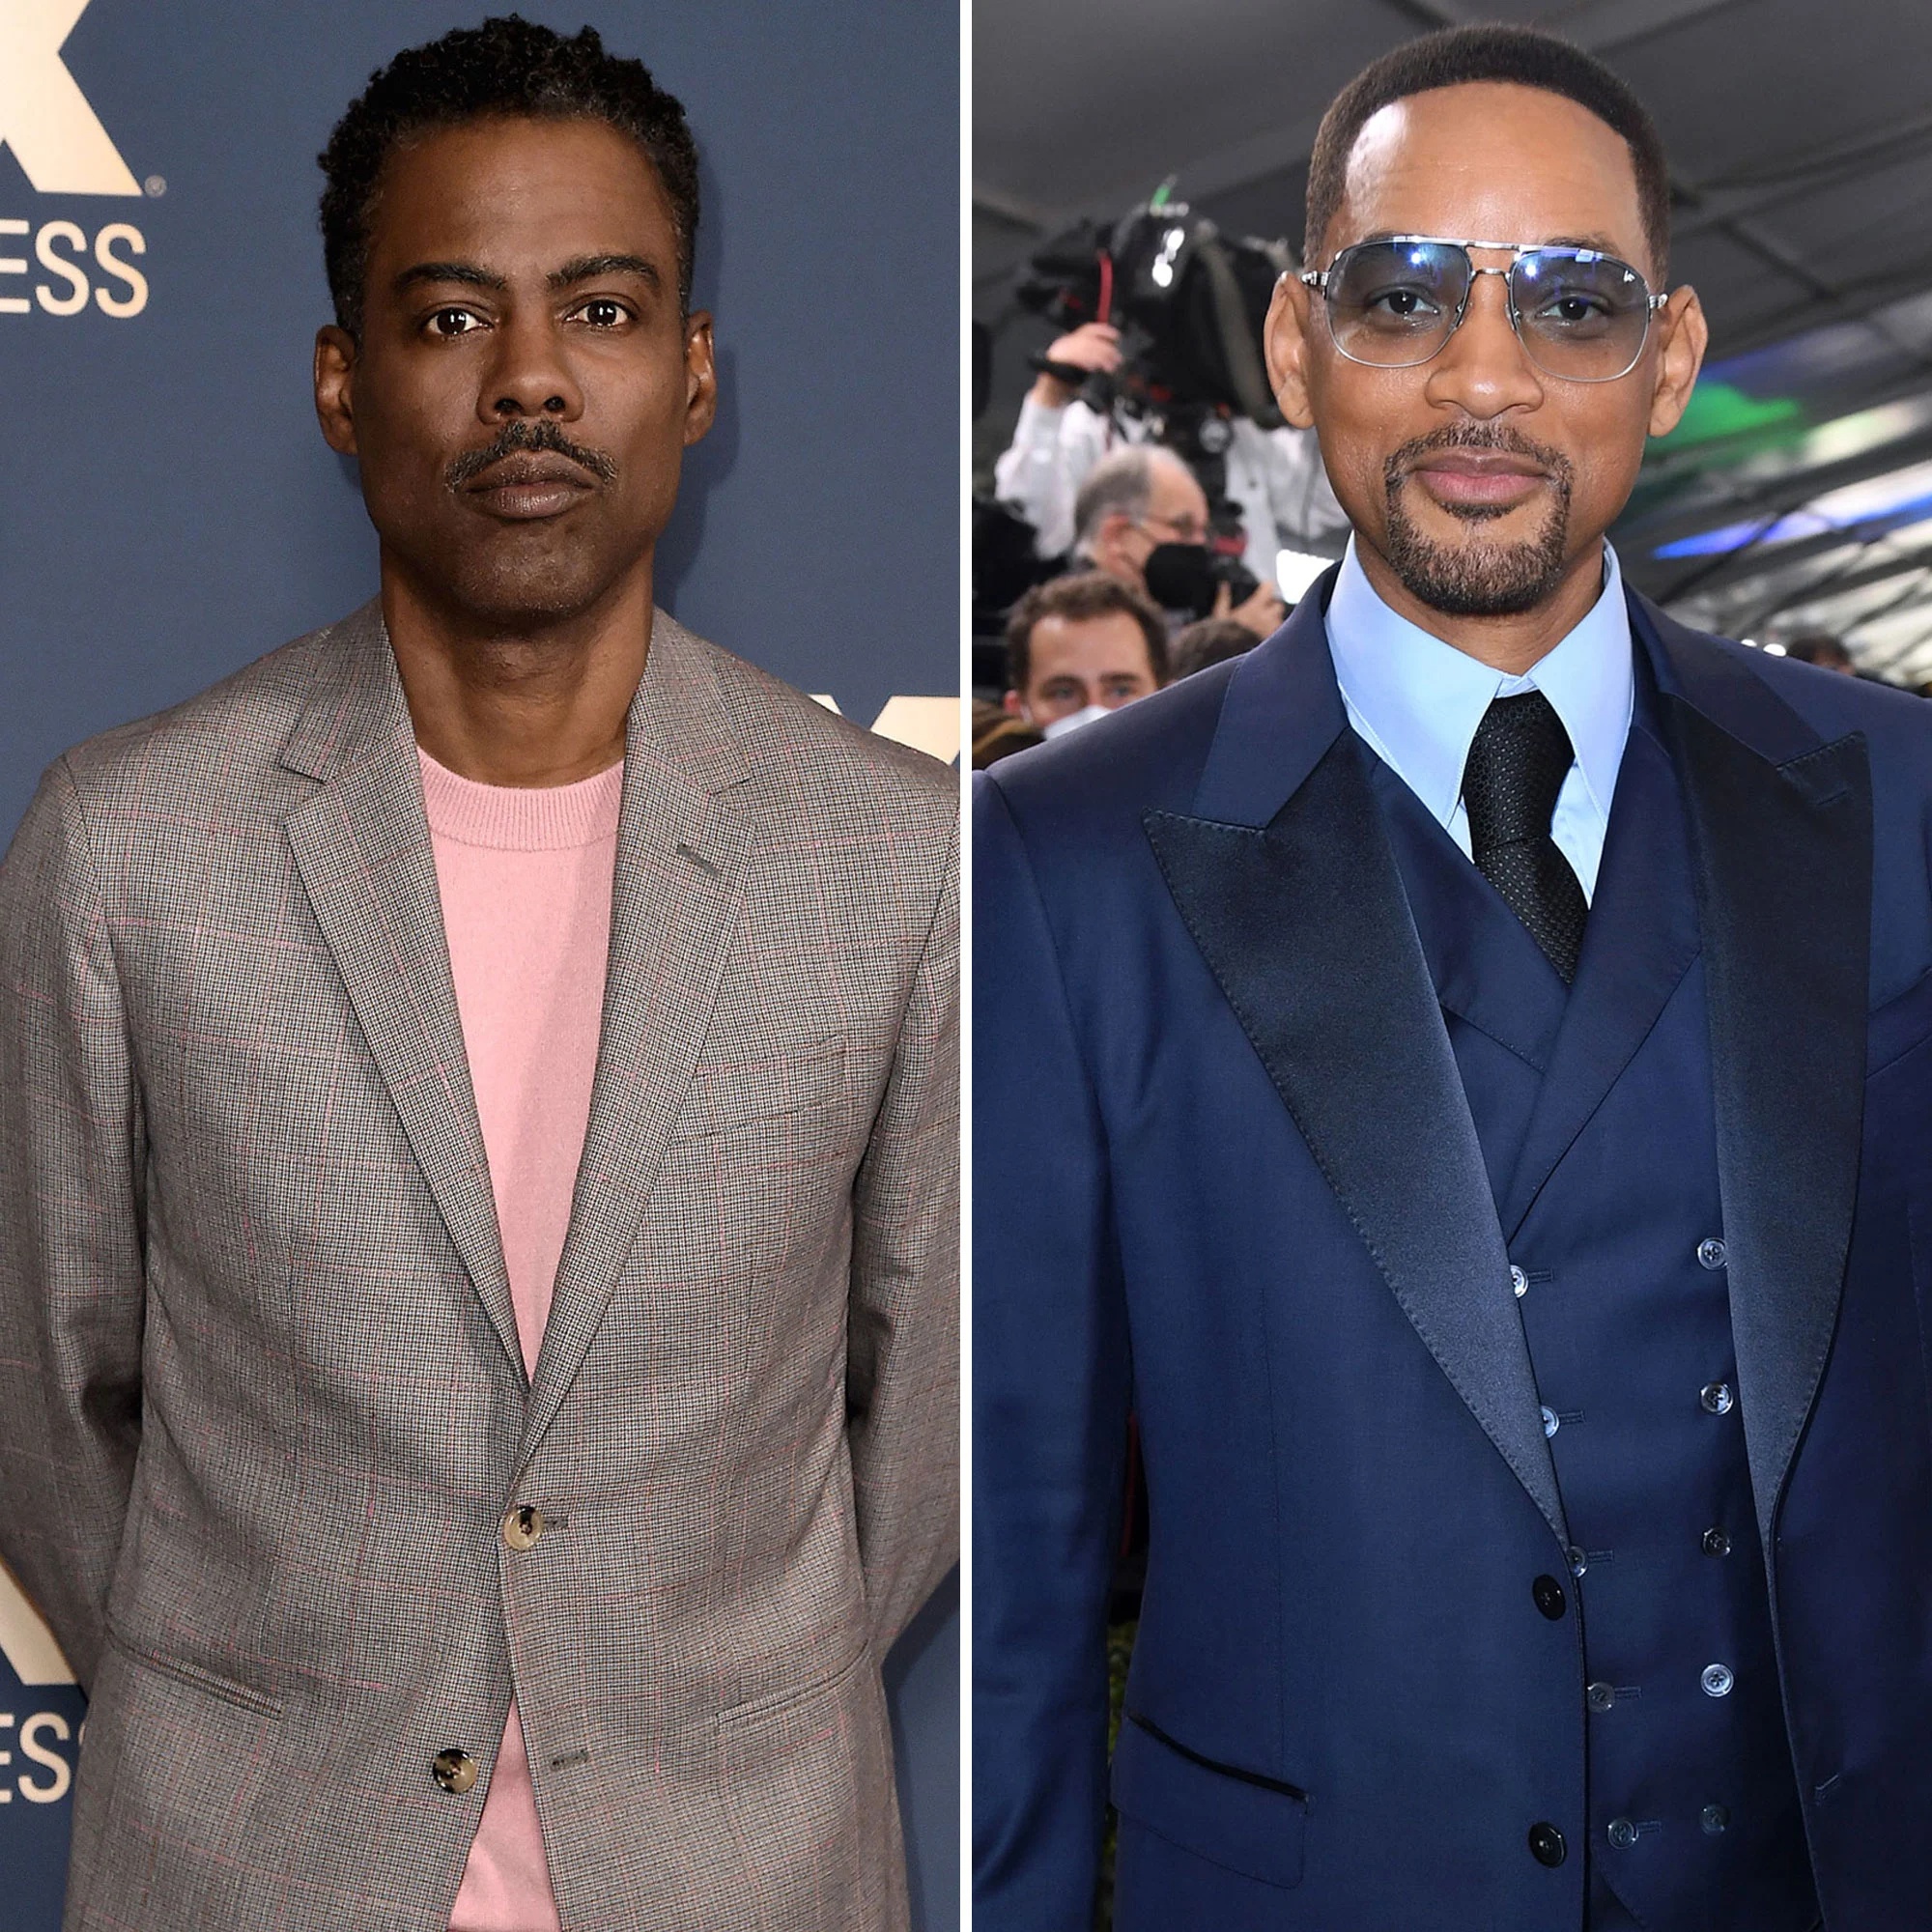 Chris Rock Rejects Oscars Host Gig After Will Smith Slap: Report.